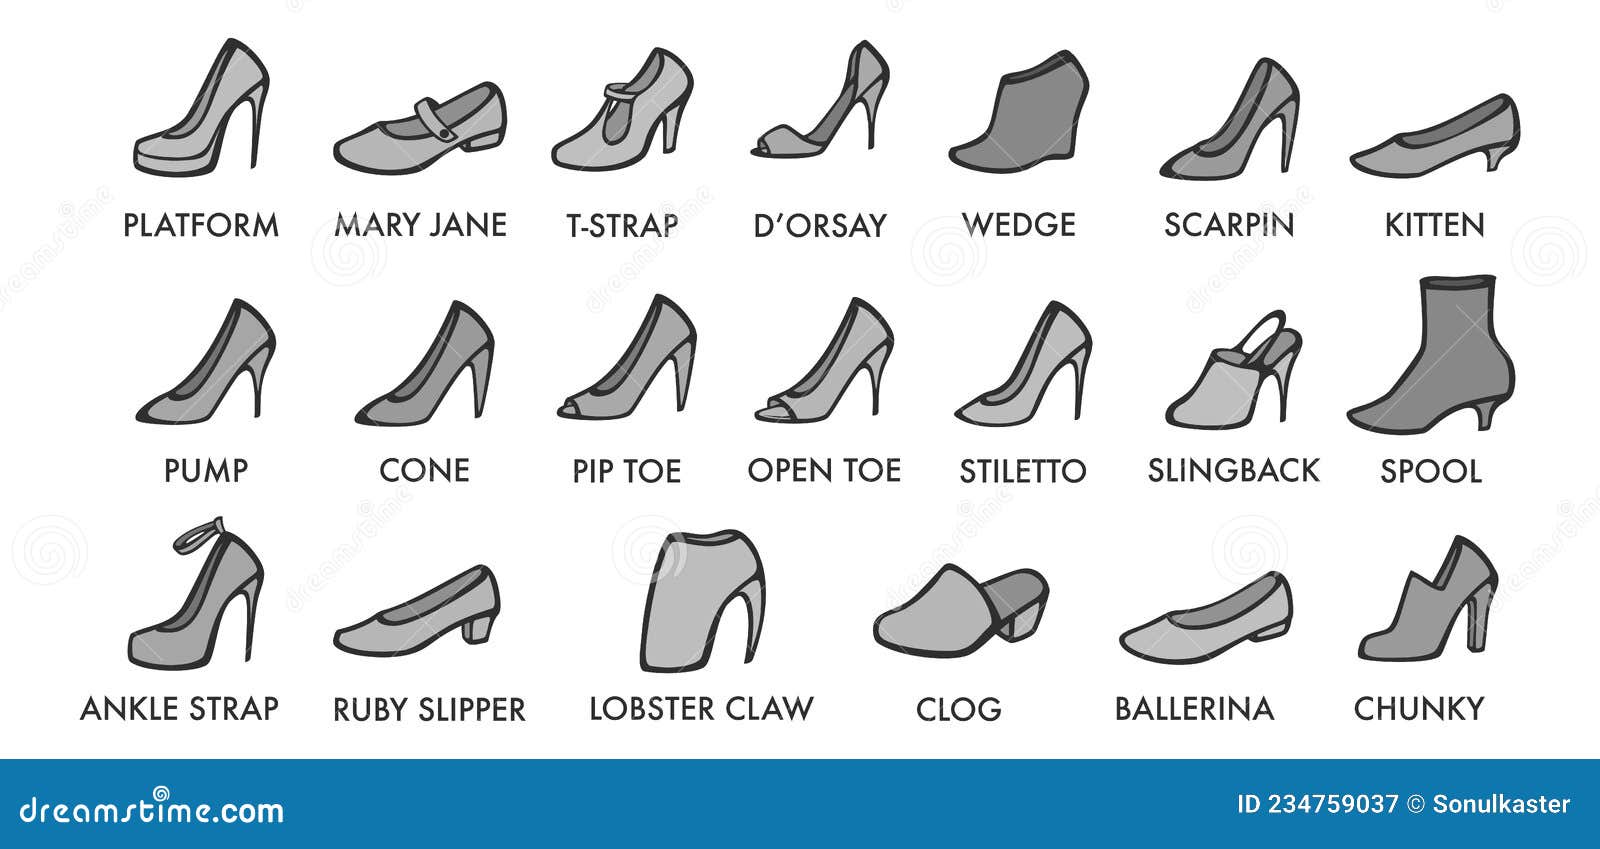 What Are Wedge Shoes? - ShoeIQ